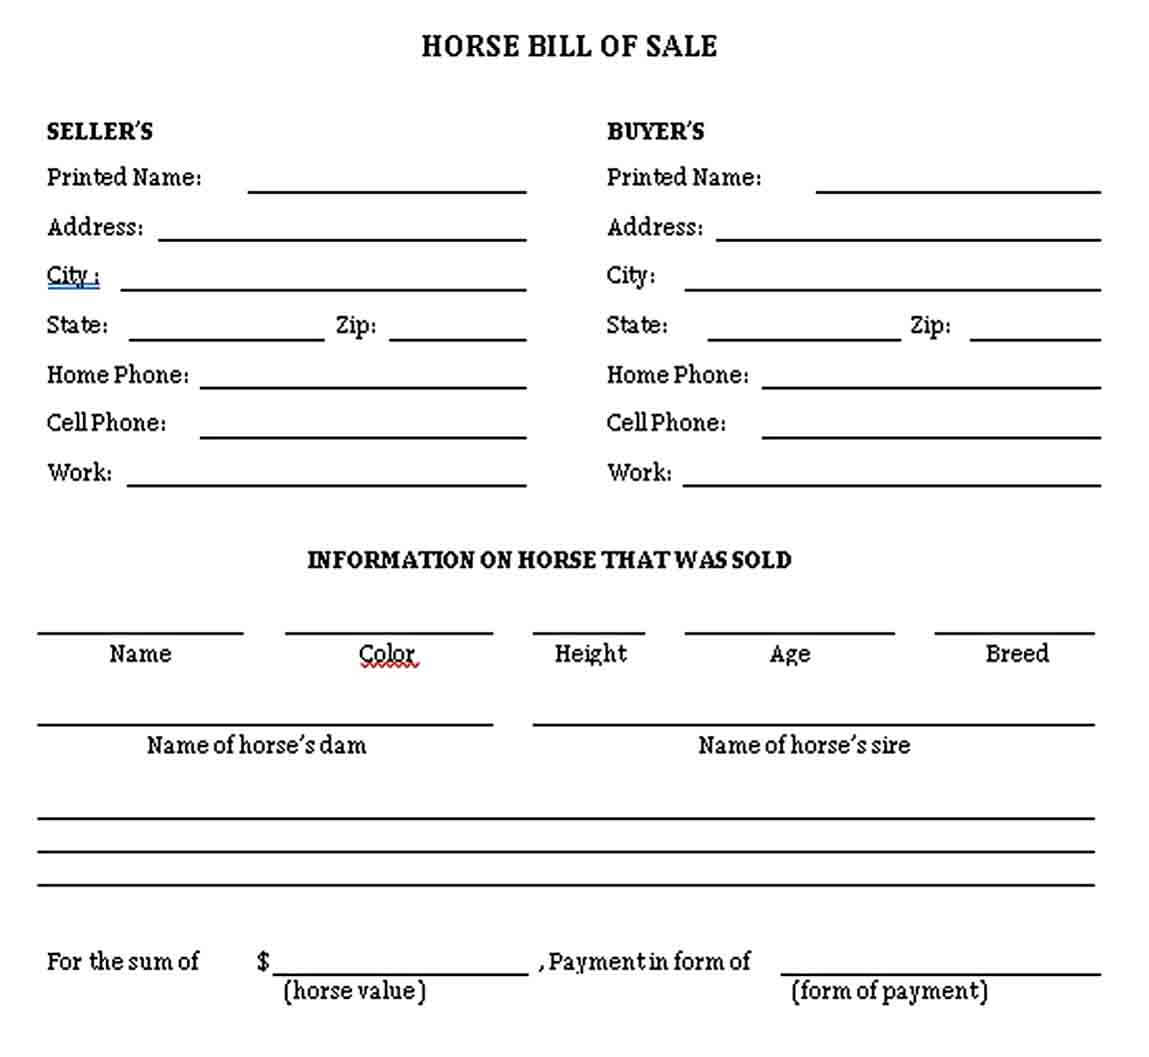 horse bill of sale template free 1